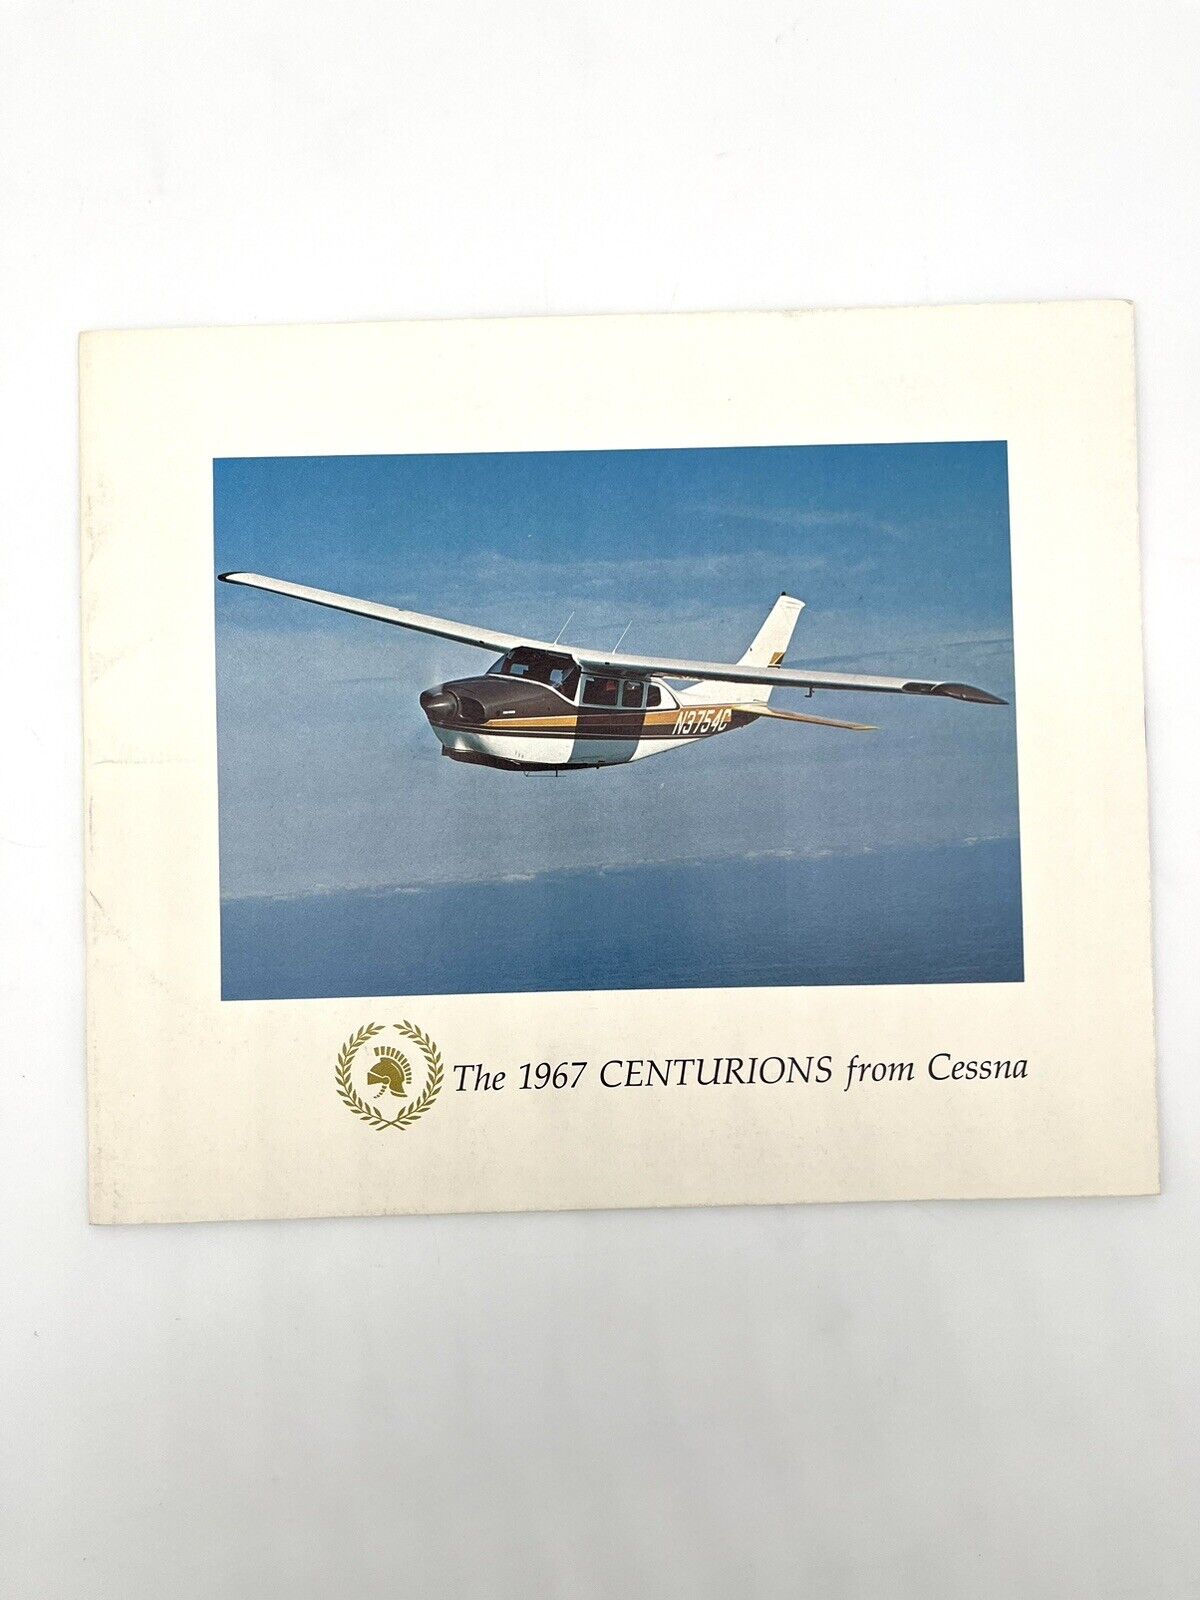 The 1967 CENTURIONS from Cessna Brochure Vintage